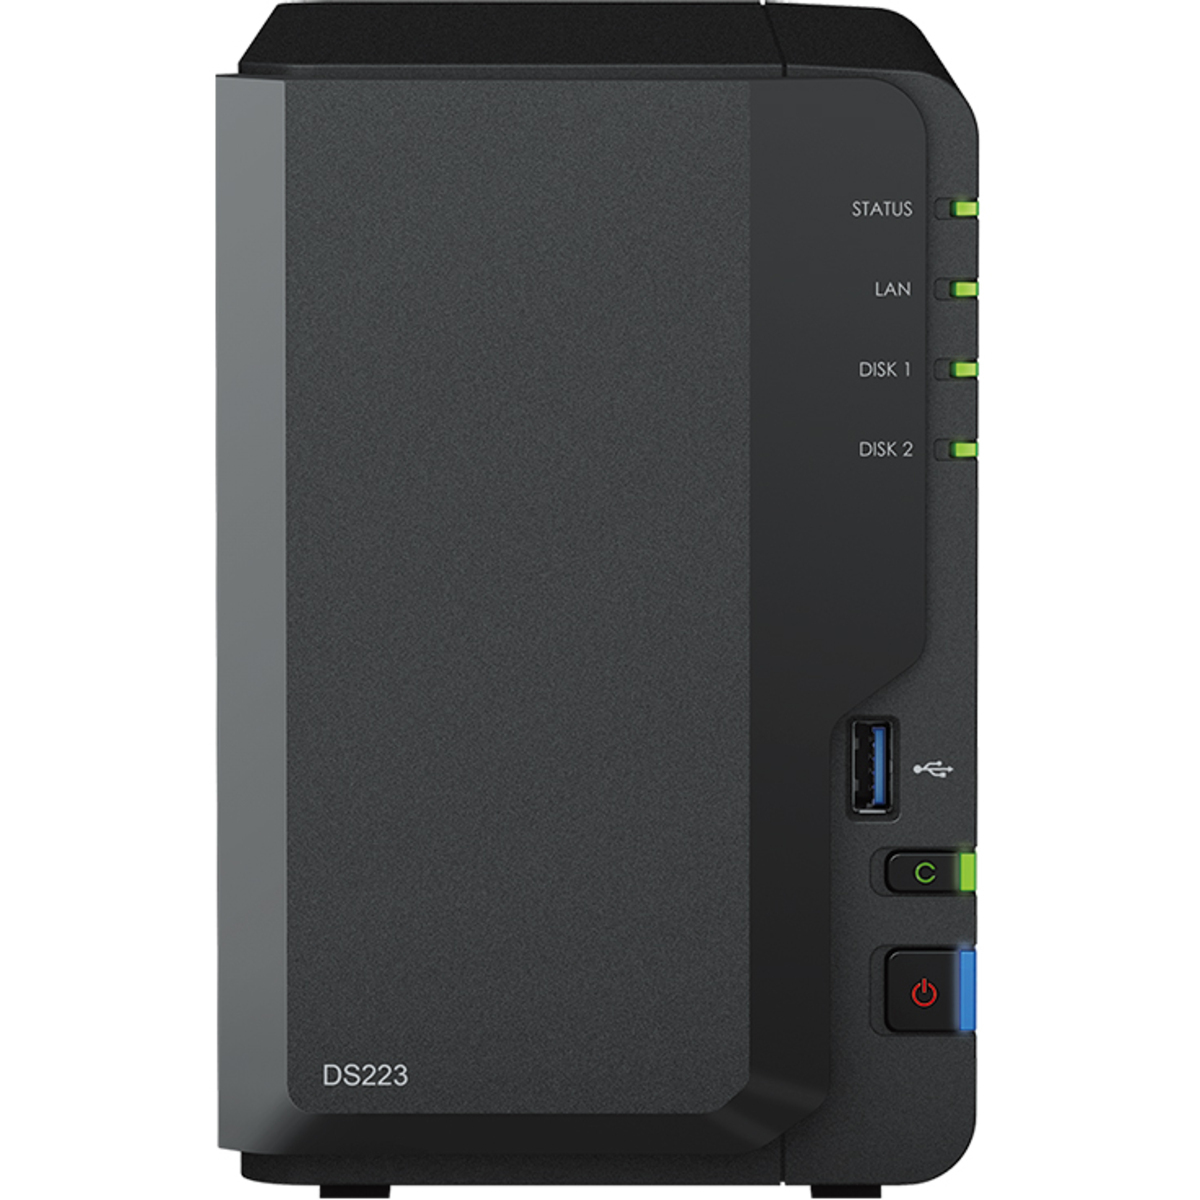 Synology DiskStation DS223 4tb 2-Bay Desktop Personal / Basic Home / Small Office NAS - Network Attached Storage Device 1x4tb Synology Plus Series HAT3300-4T 3.5 5400rmp SATA 6Gb/s HDD NAS Class Drives Installed - Burn-In Tested DiskStation DS223